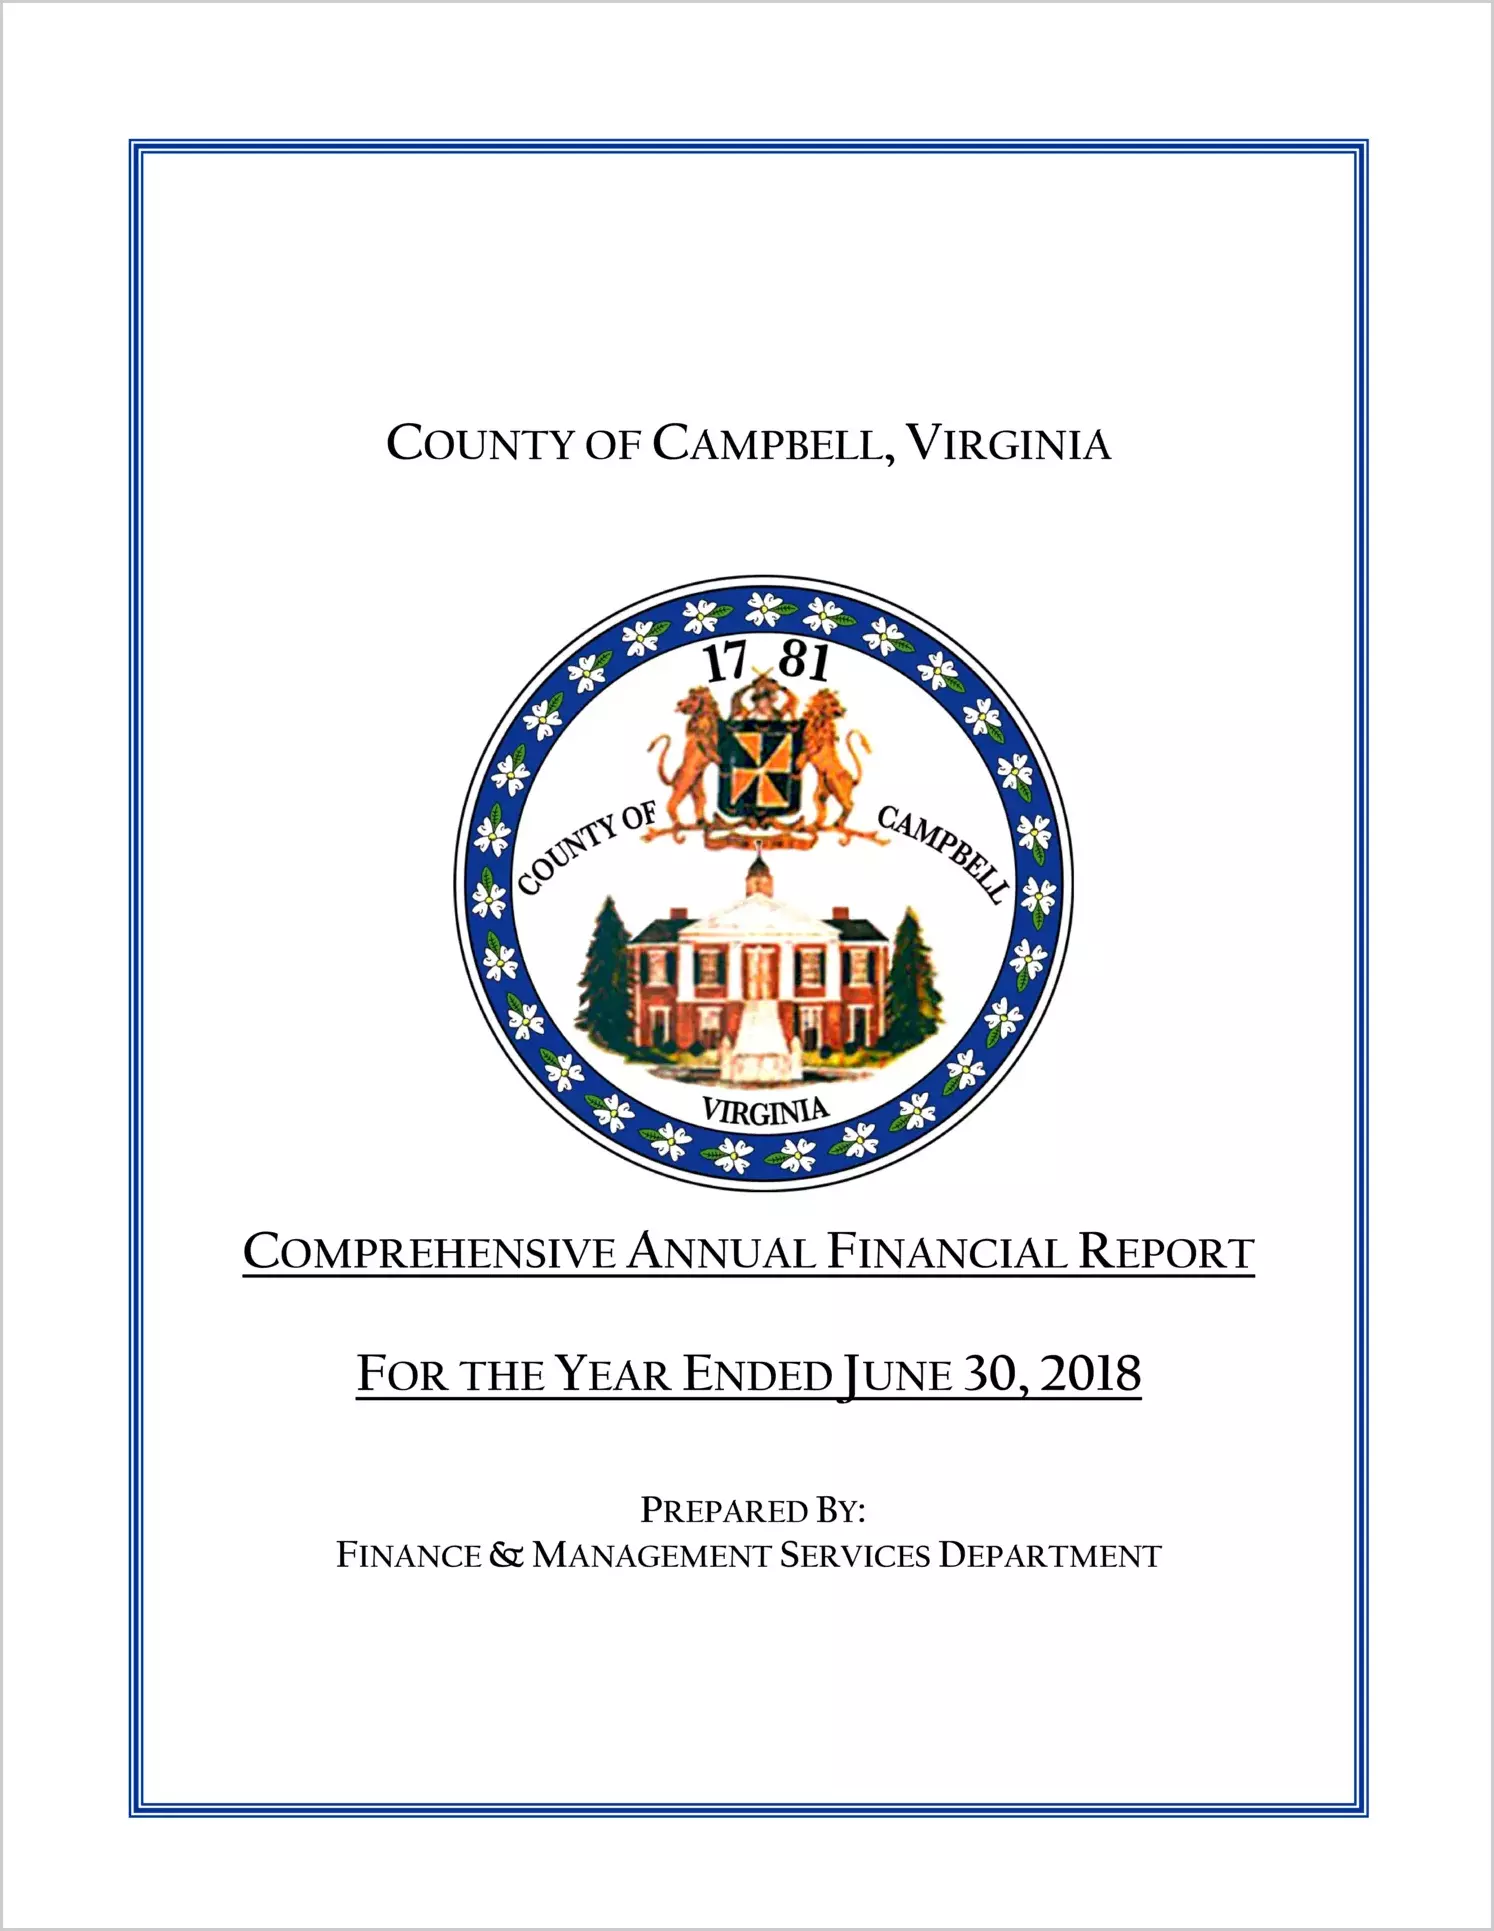 2018 Annual Financial Report for County of Campbell